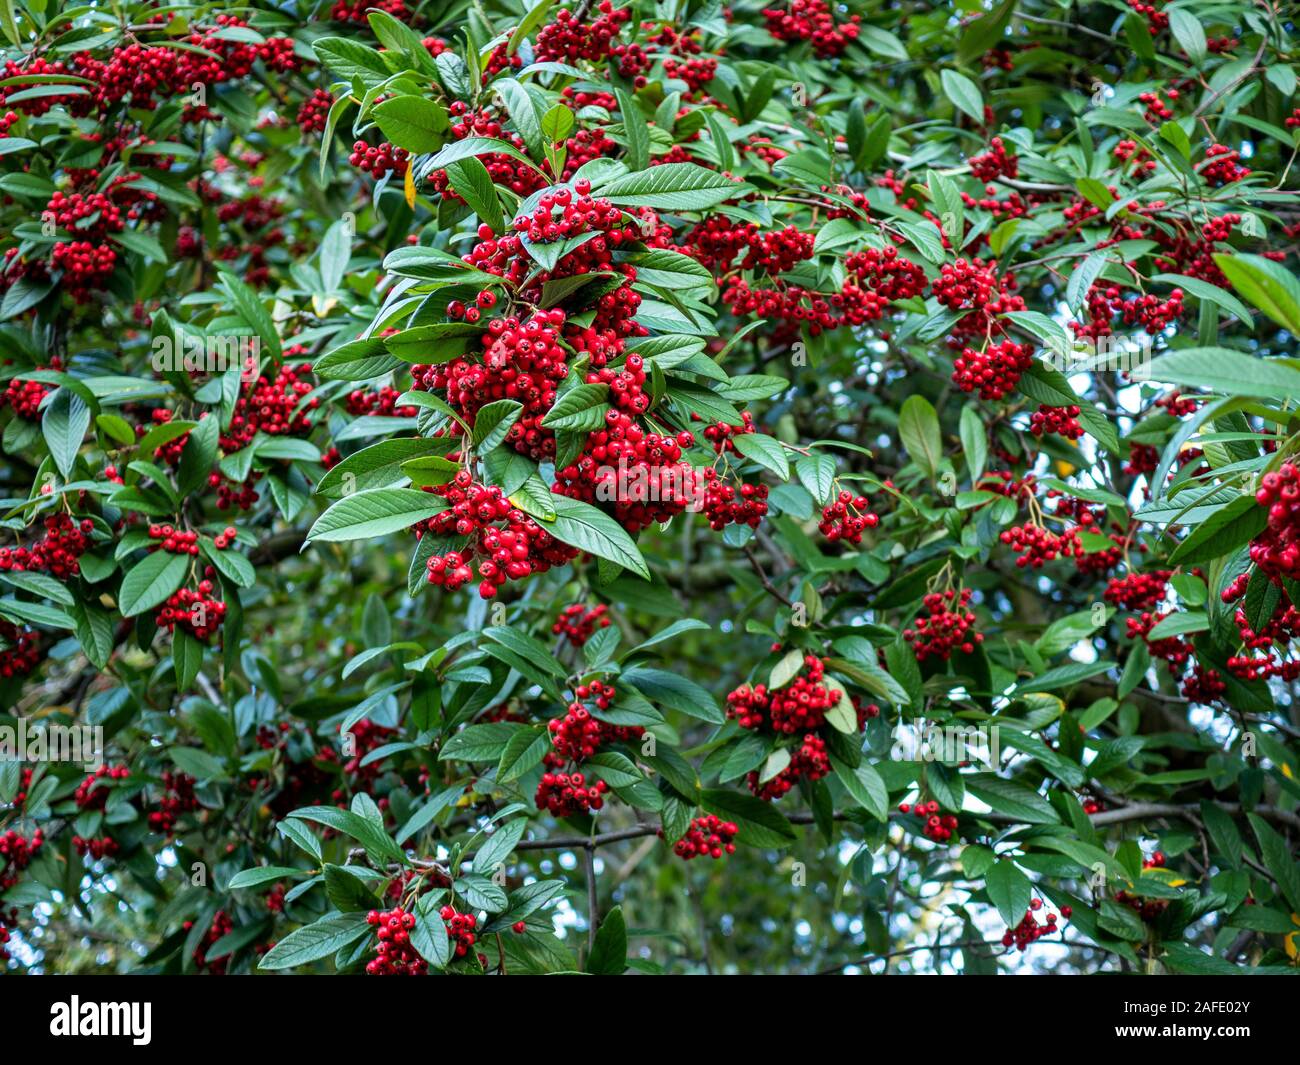 Willowleaf cotoneaster bush (Cotoneaster salicifolius) with abundant red berries and green leaves Stock Photo